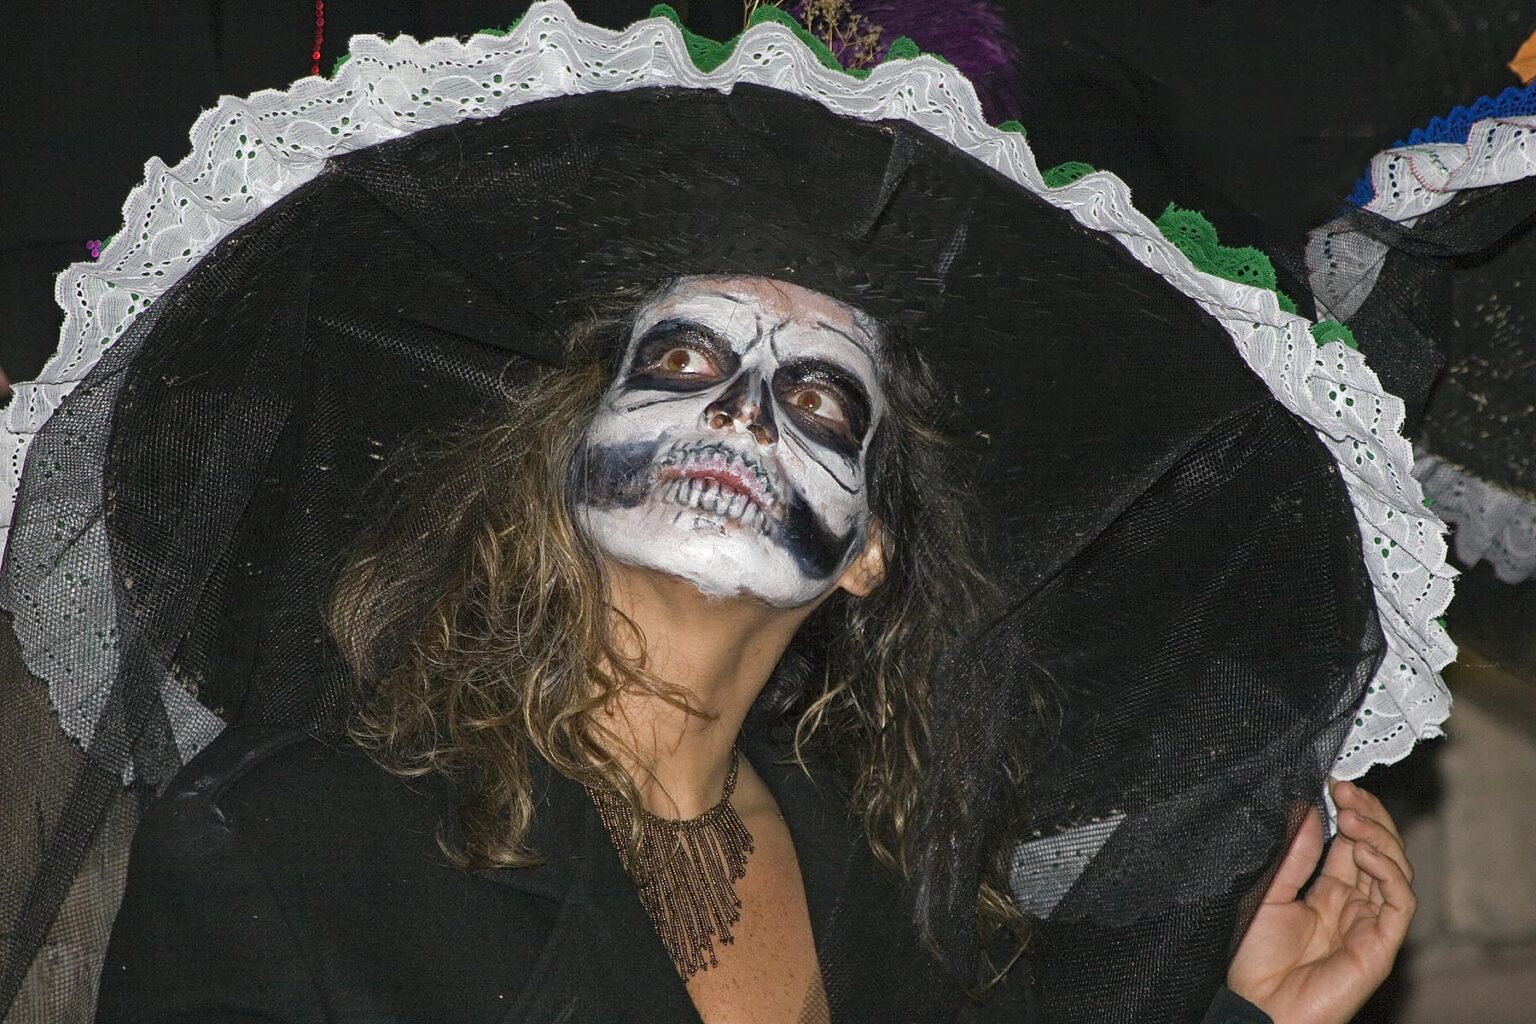 Adults dress up as skeletons and distribute candy to Mexican children during the DEAD OF THE DEAD - SAN MIGUEL DE ALLENDE, MEXICO